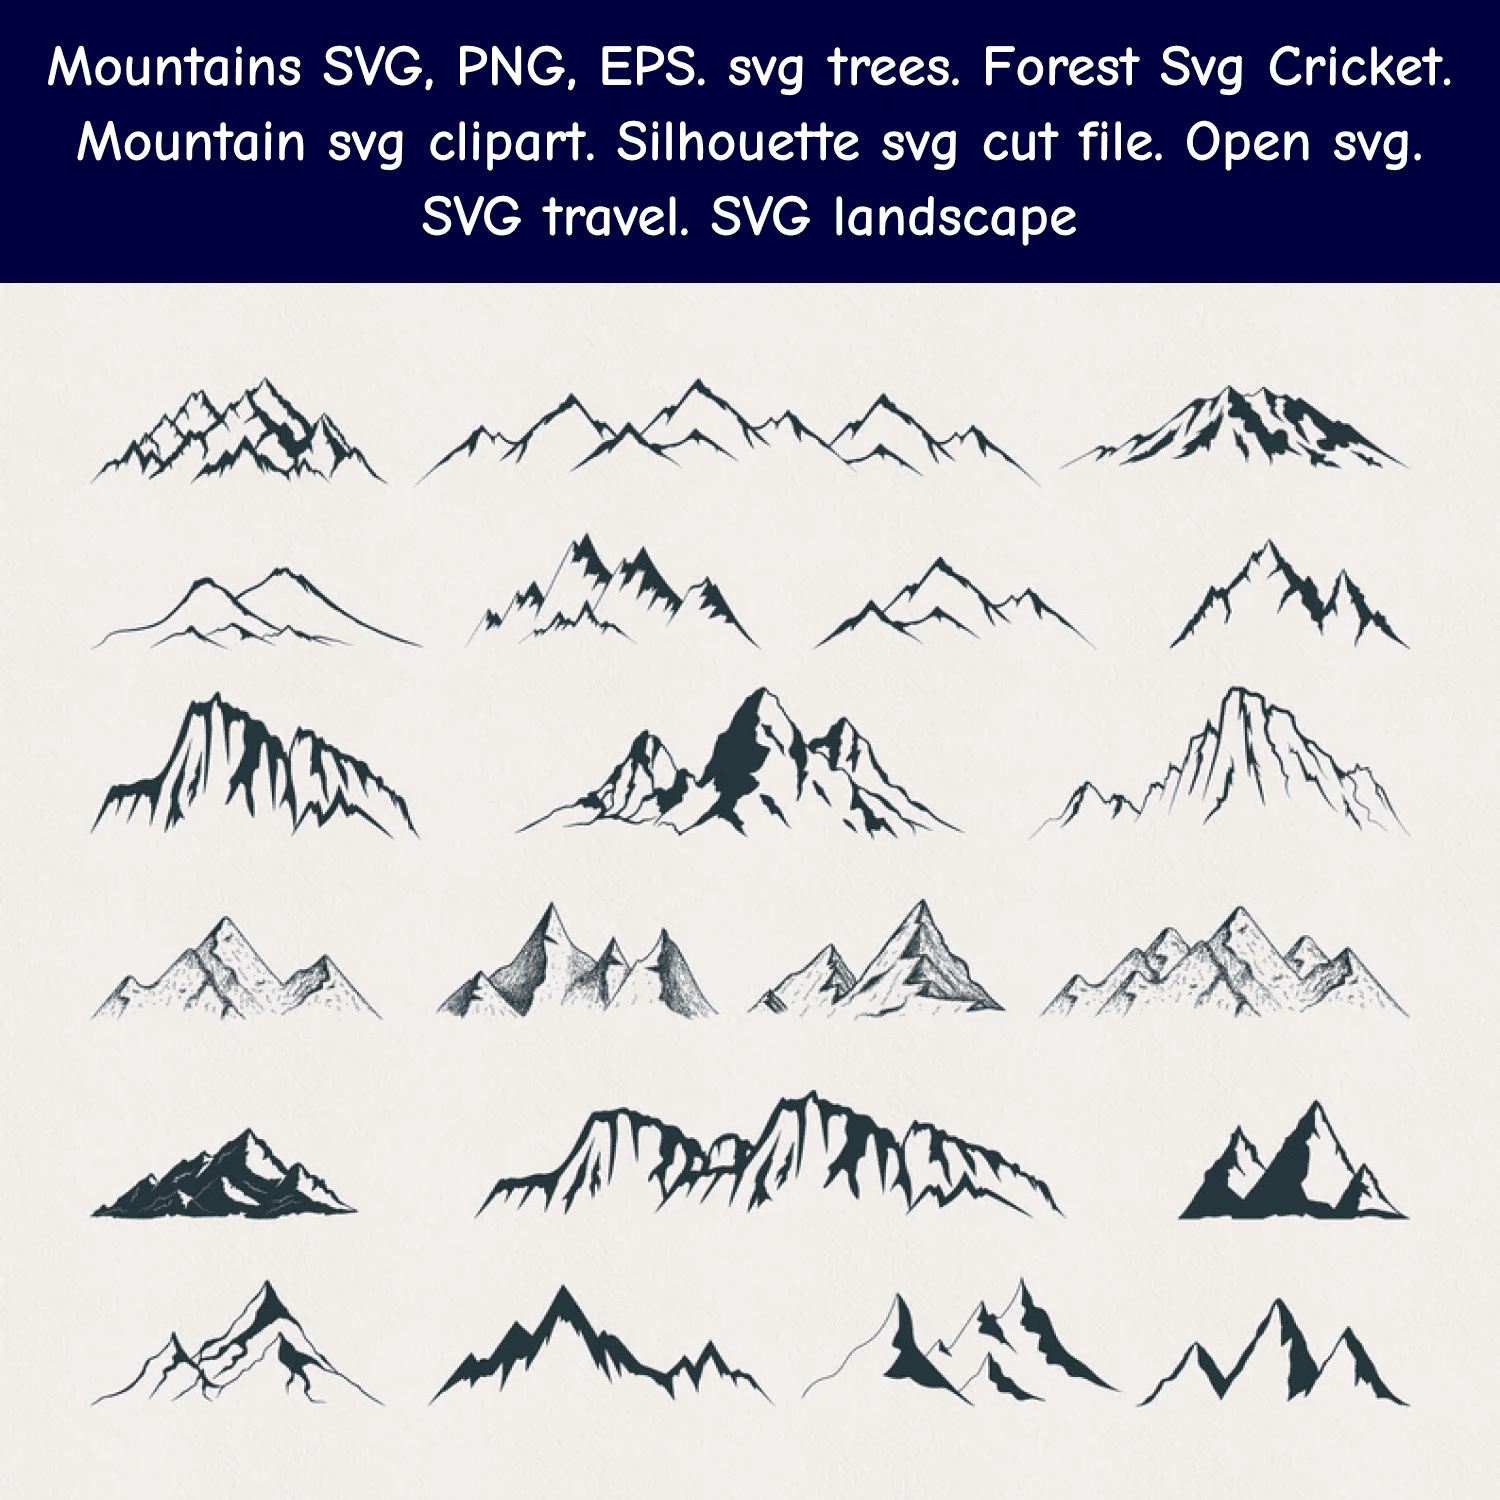 Mountains SVG cover.